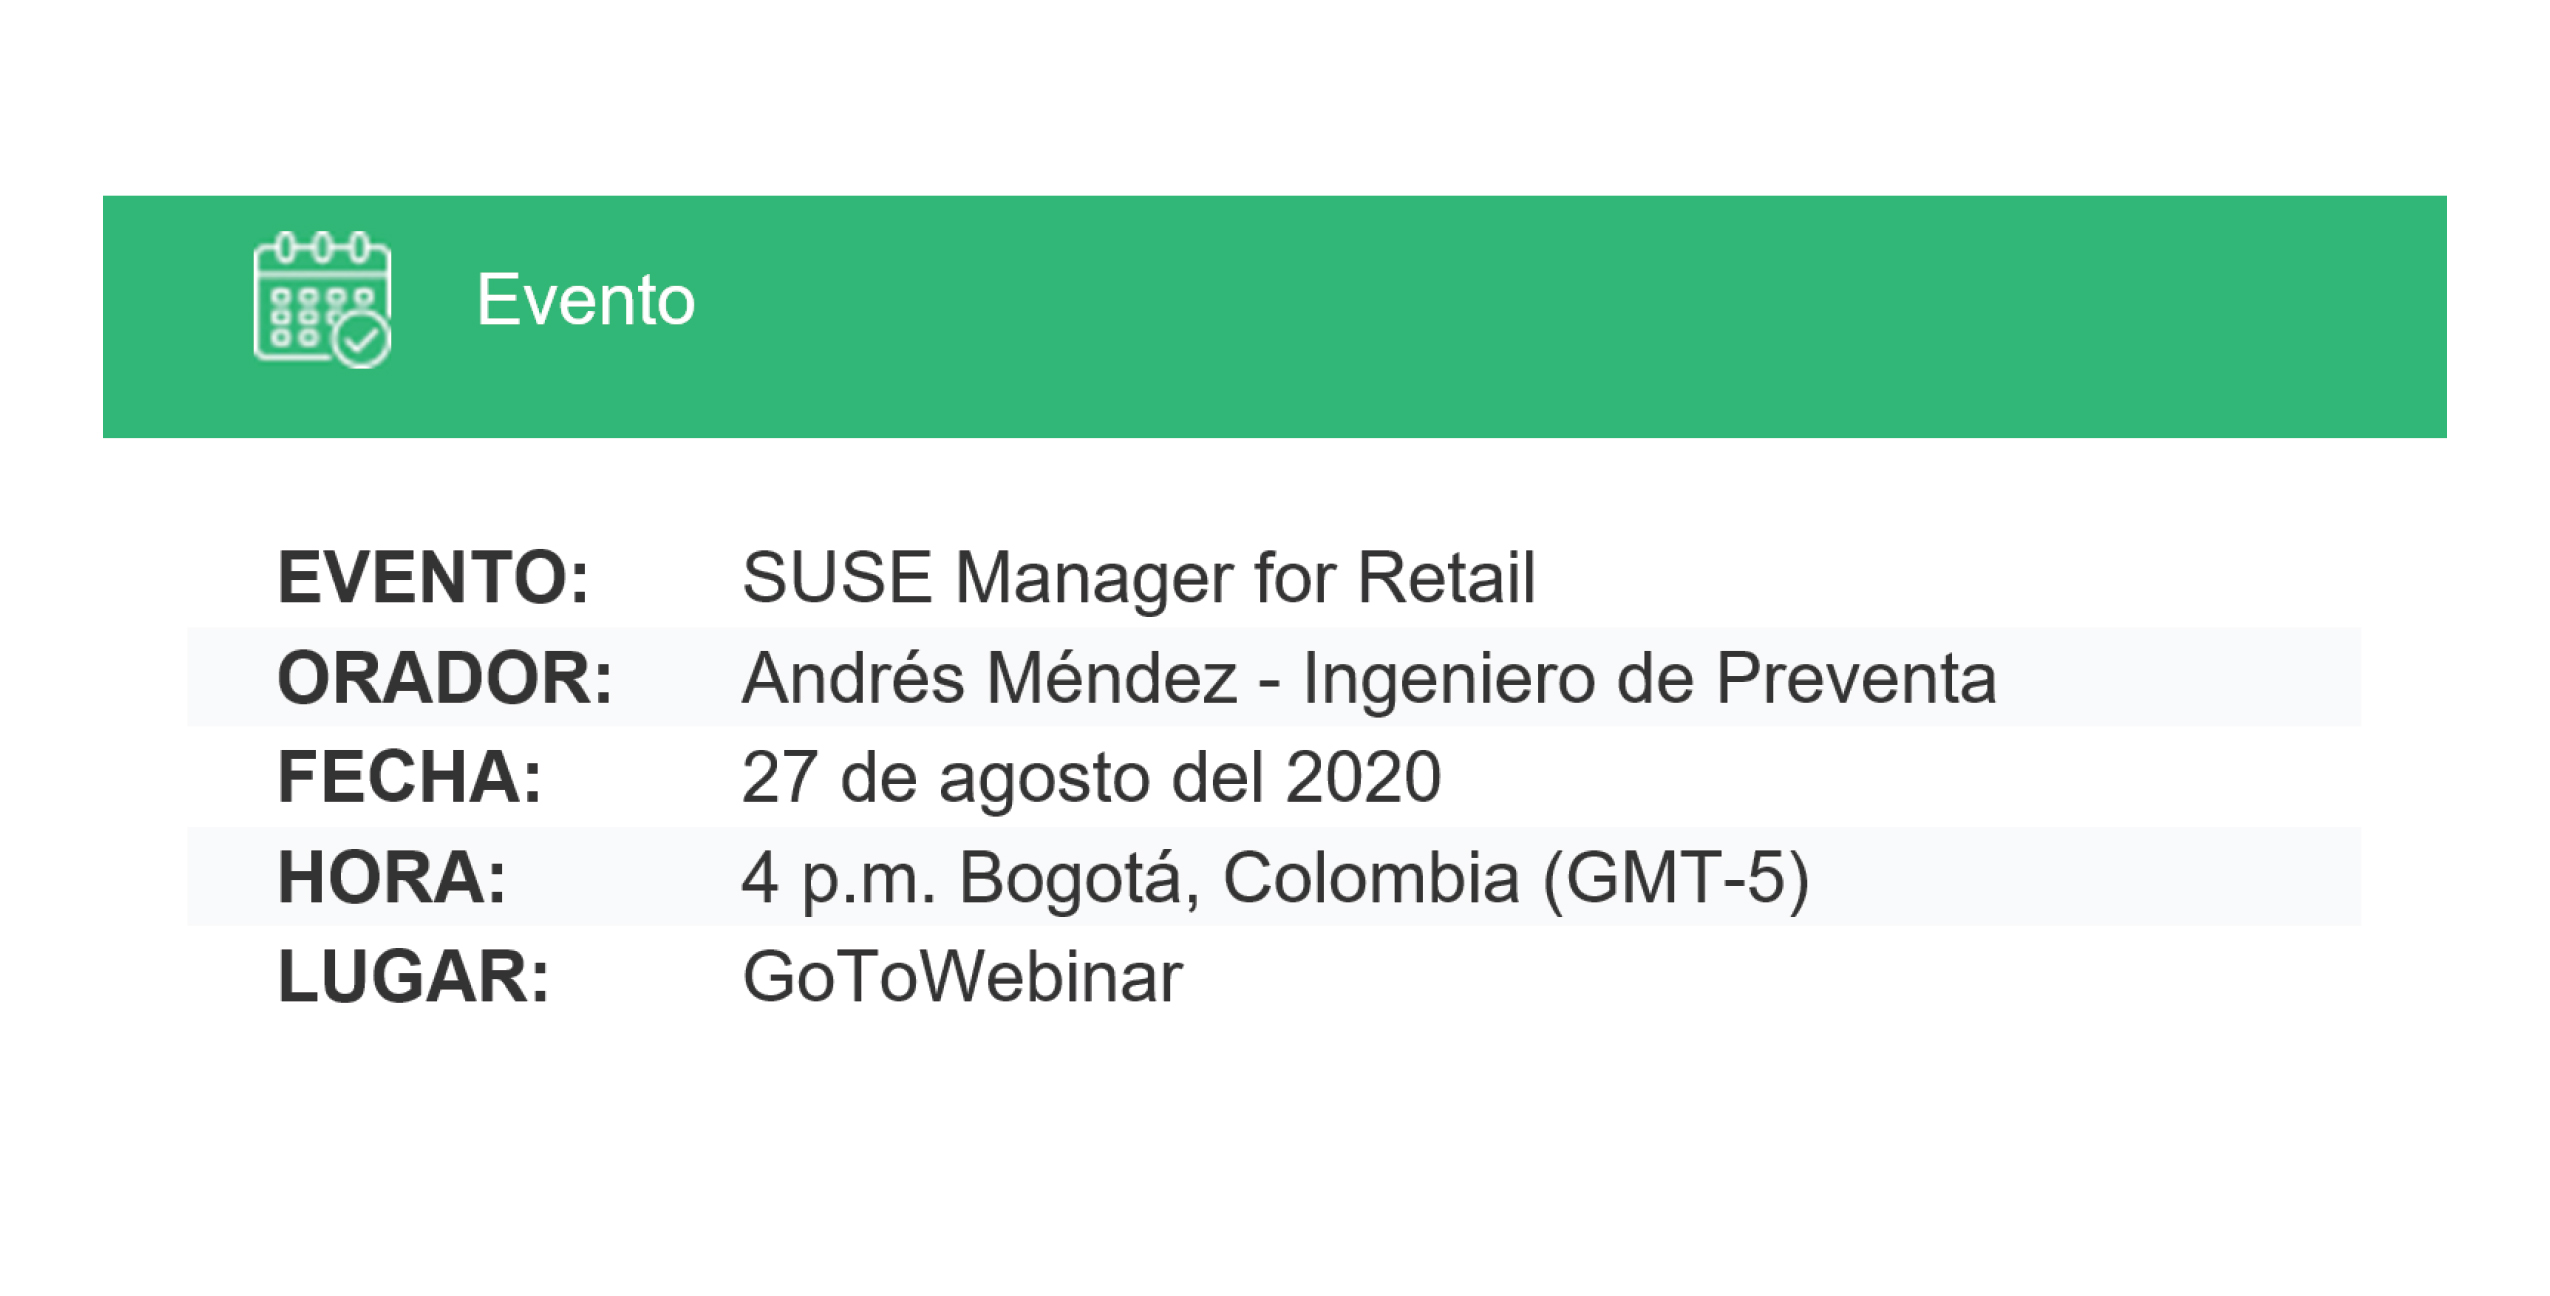 SUSE Manager for Retailevent